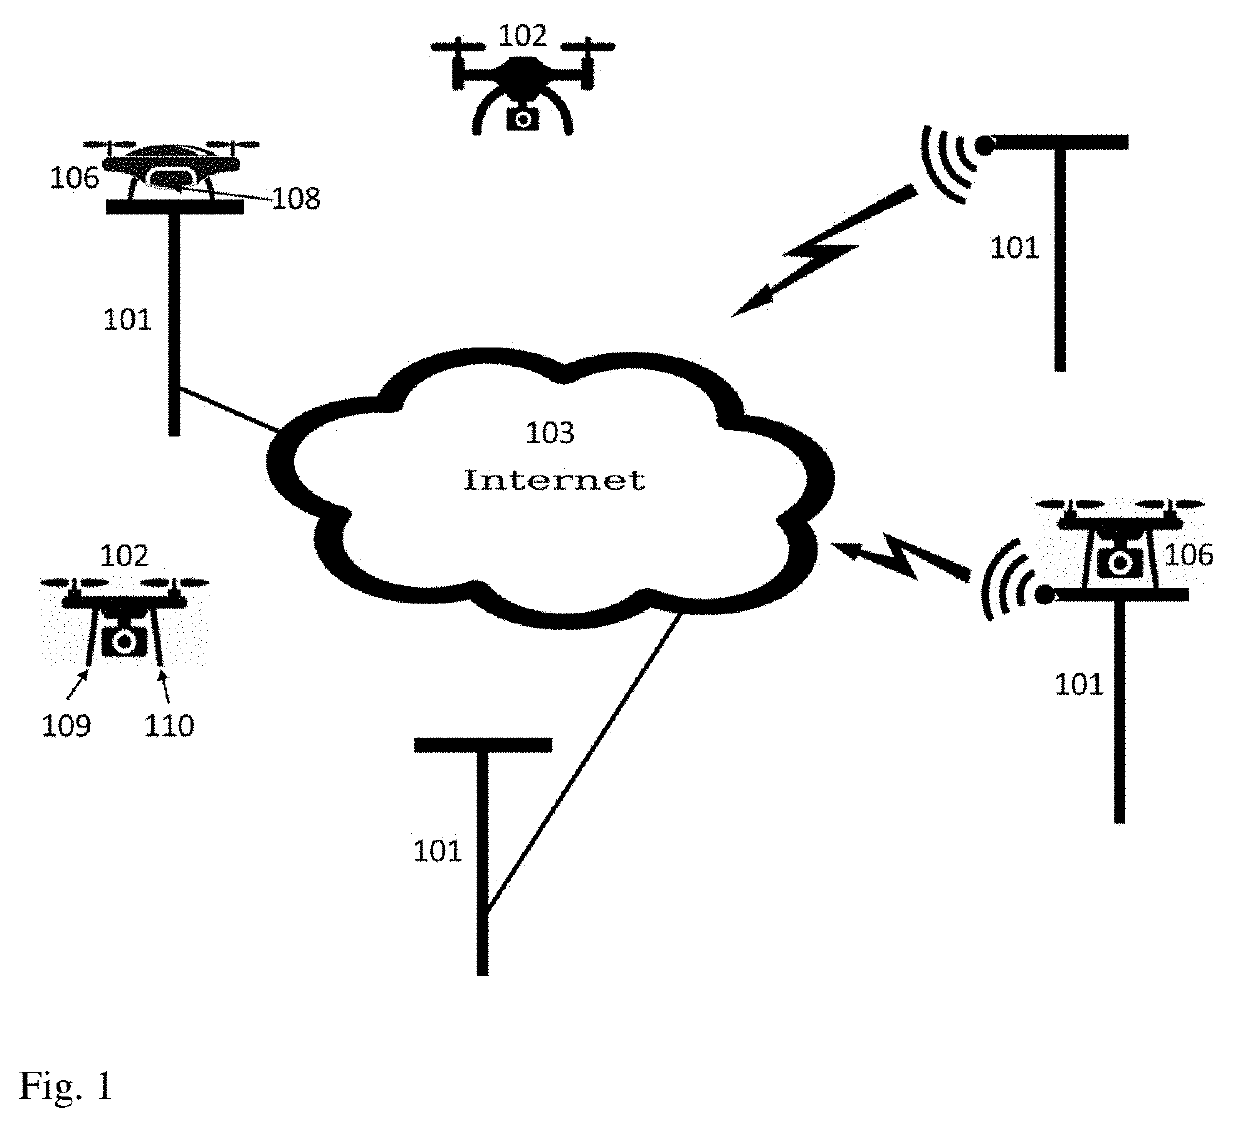 Network of distributed drone system and parking pads